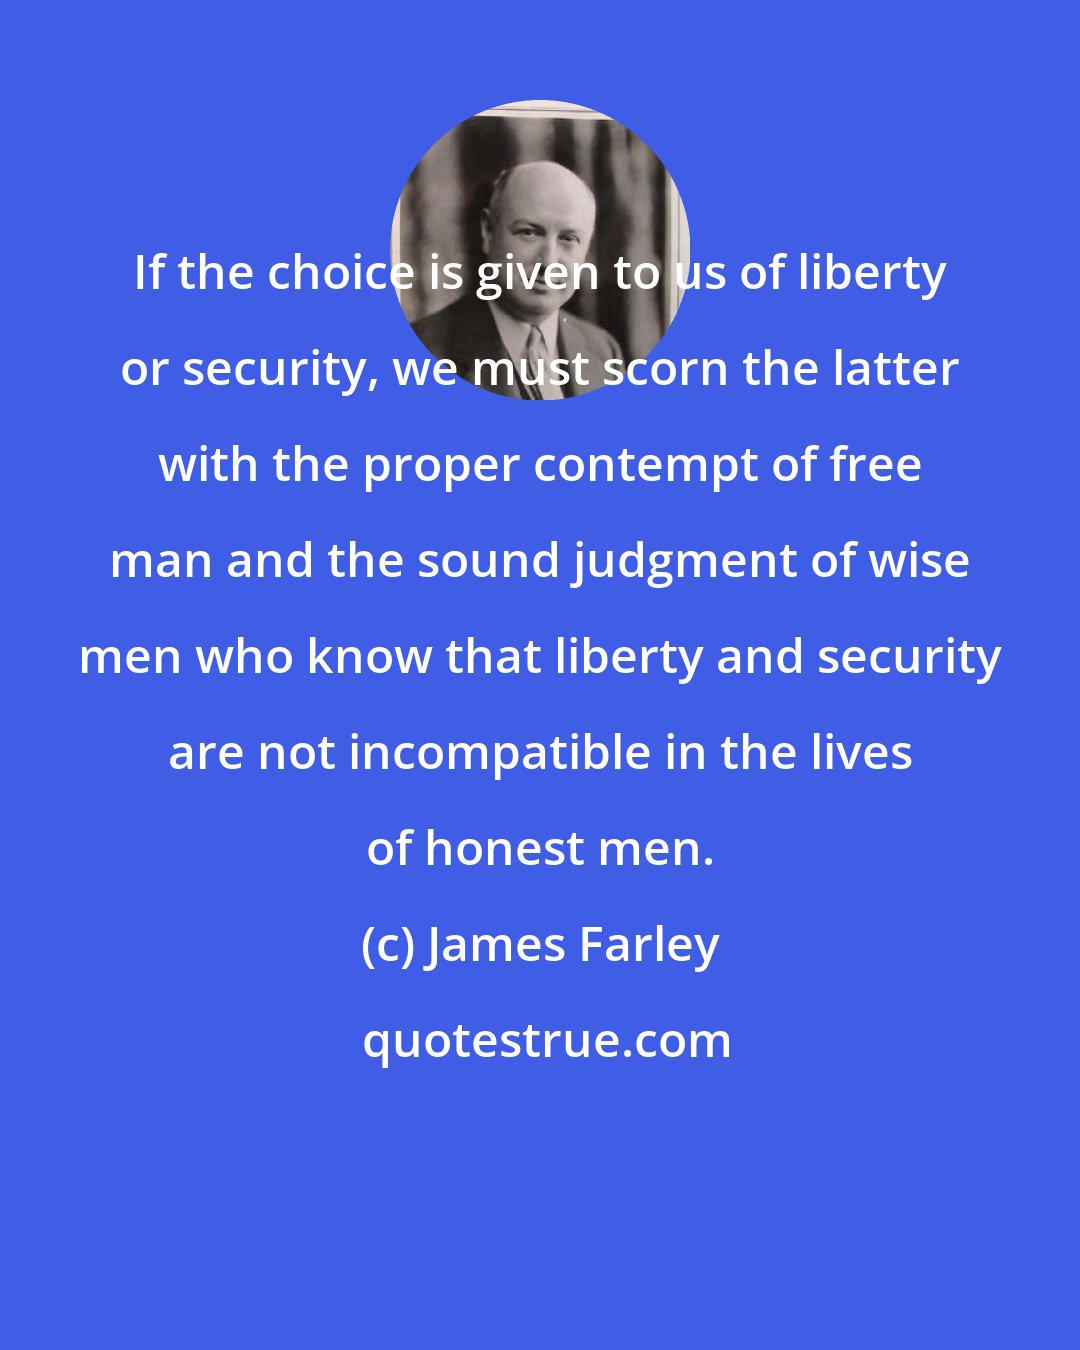 James Farley: If the choice is given to us of liberty or security, we must scorn the latter with the proper contempt of free man and the sound judgment of wise men who know that liberty and security are not incompatible in the lives of honest men.